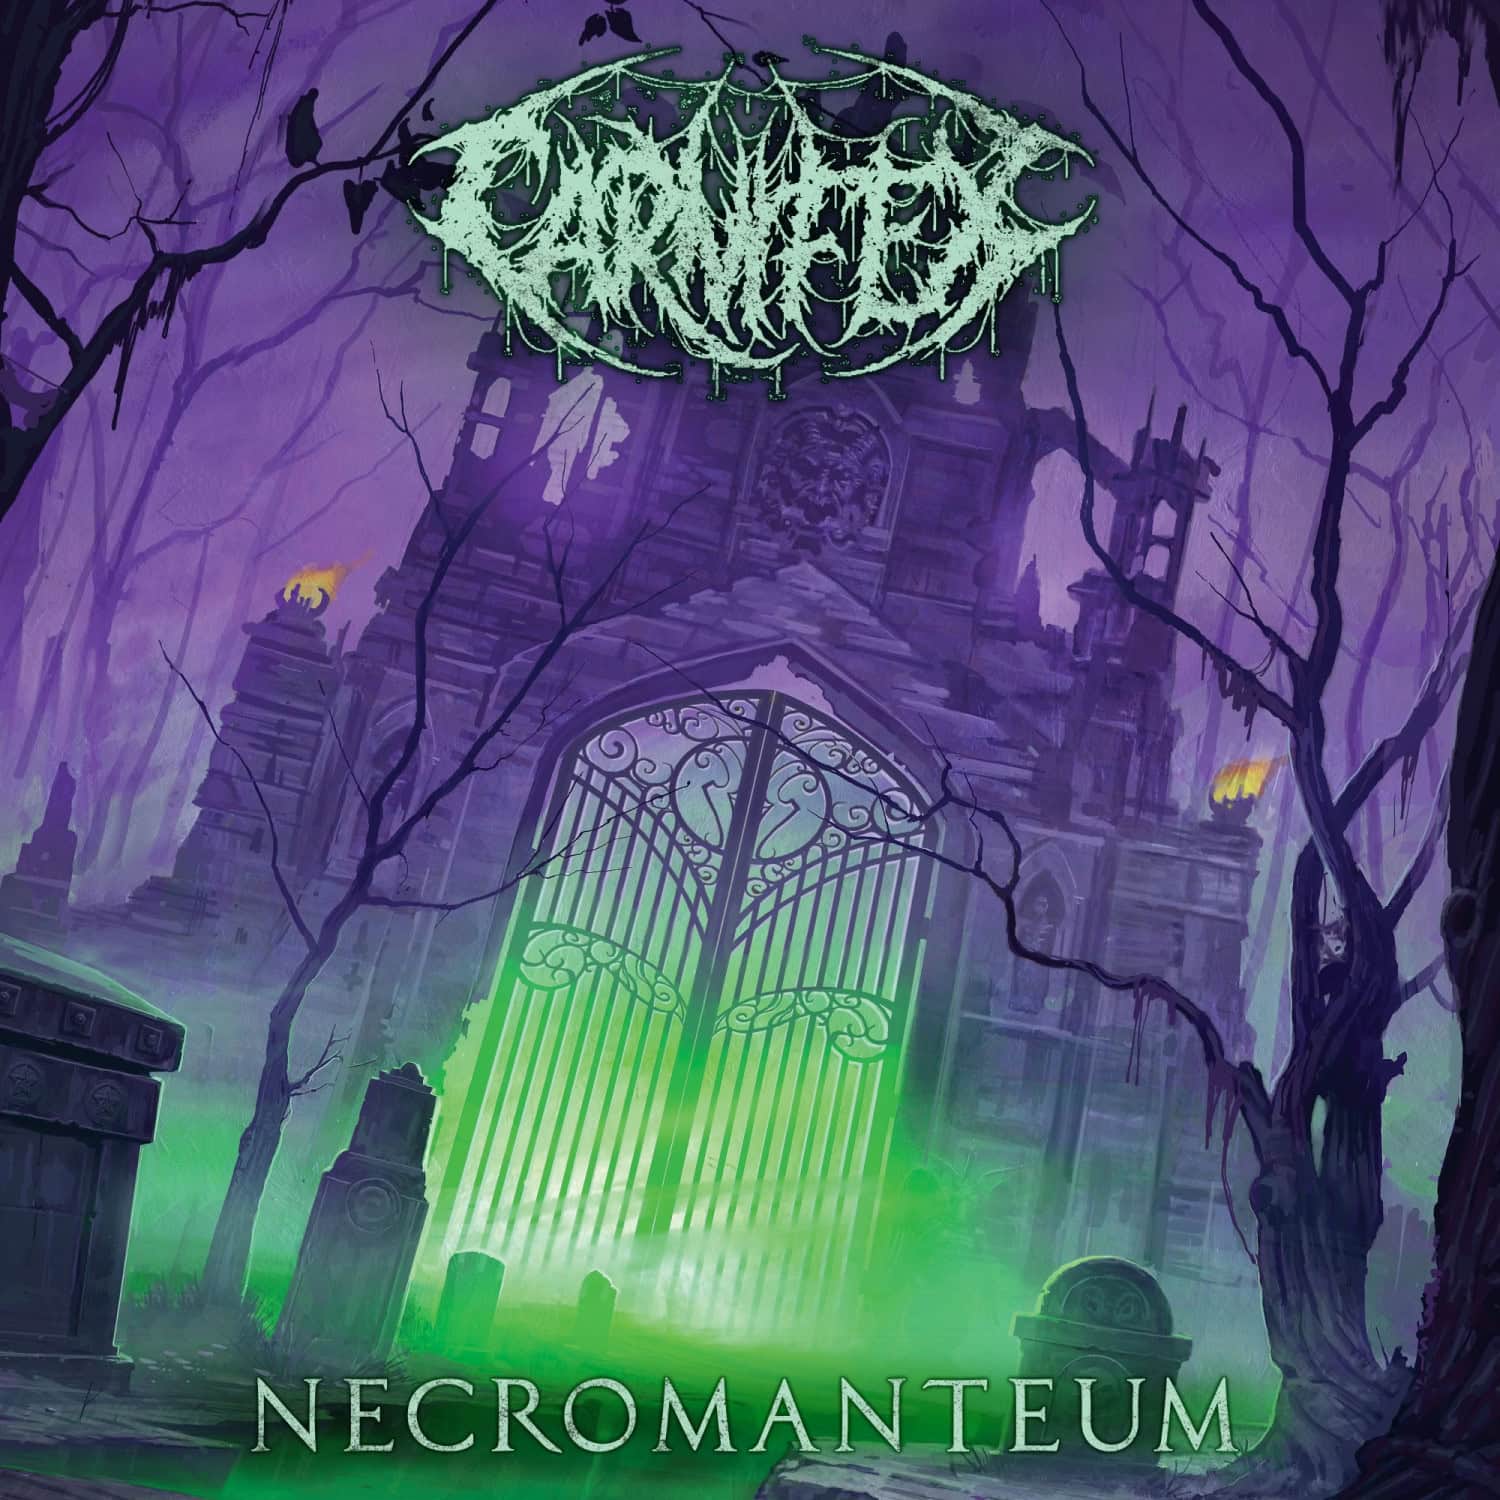 CARNIFEX "Necromanteum" neues Video "Torn In Two" News vampster